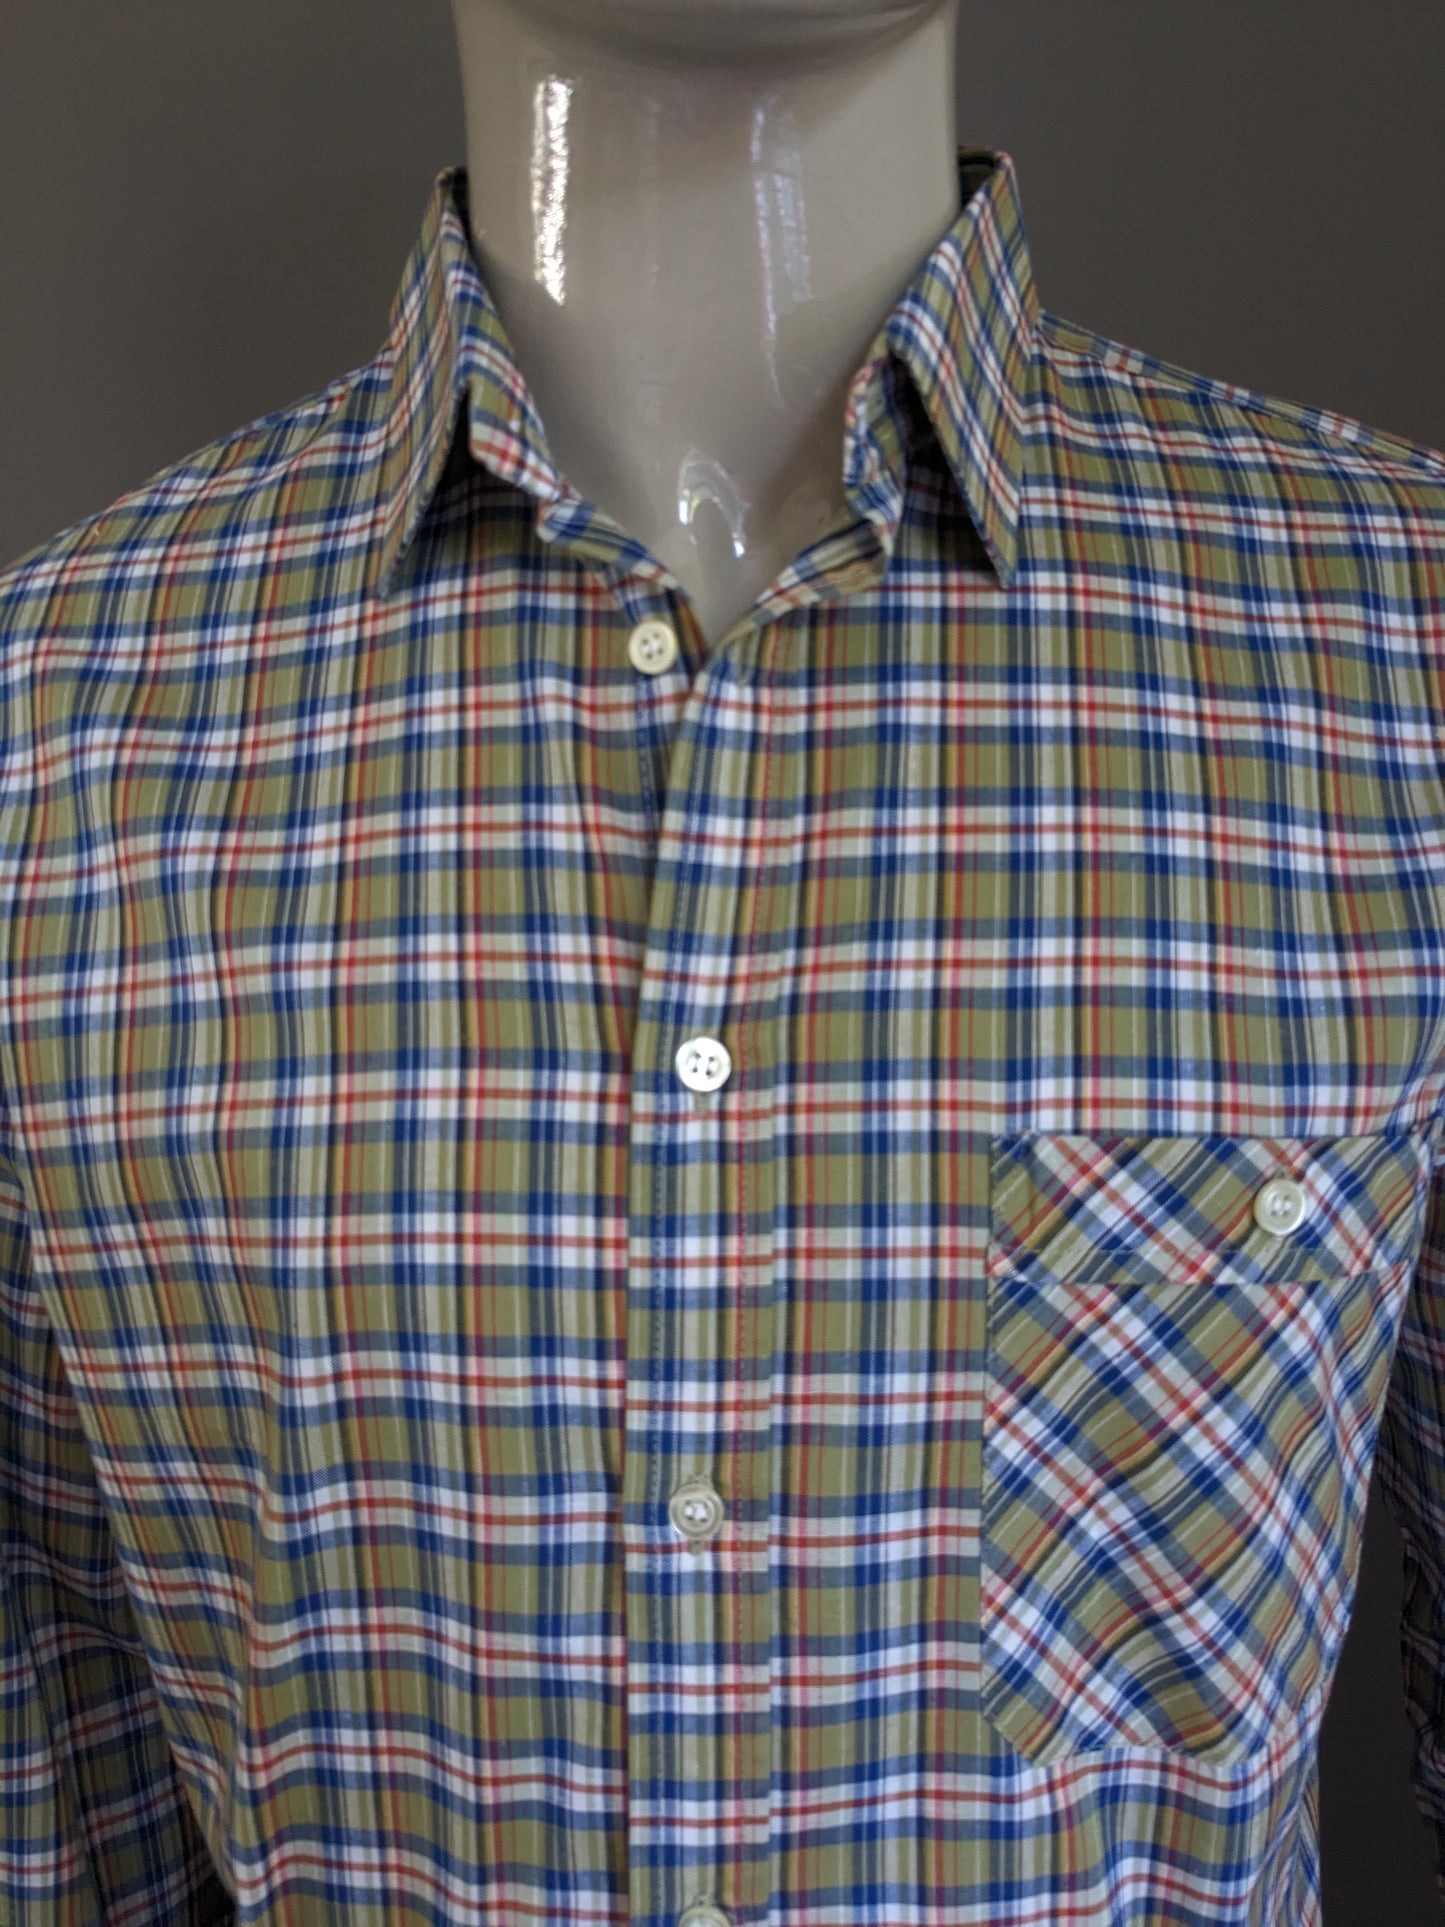 Vintage 70's Soldner Shirt. Green blue red checked. Size 42 / L.